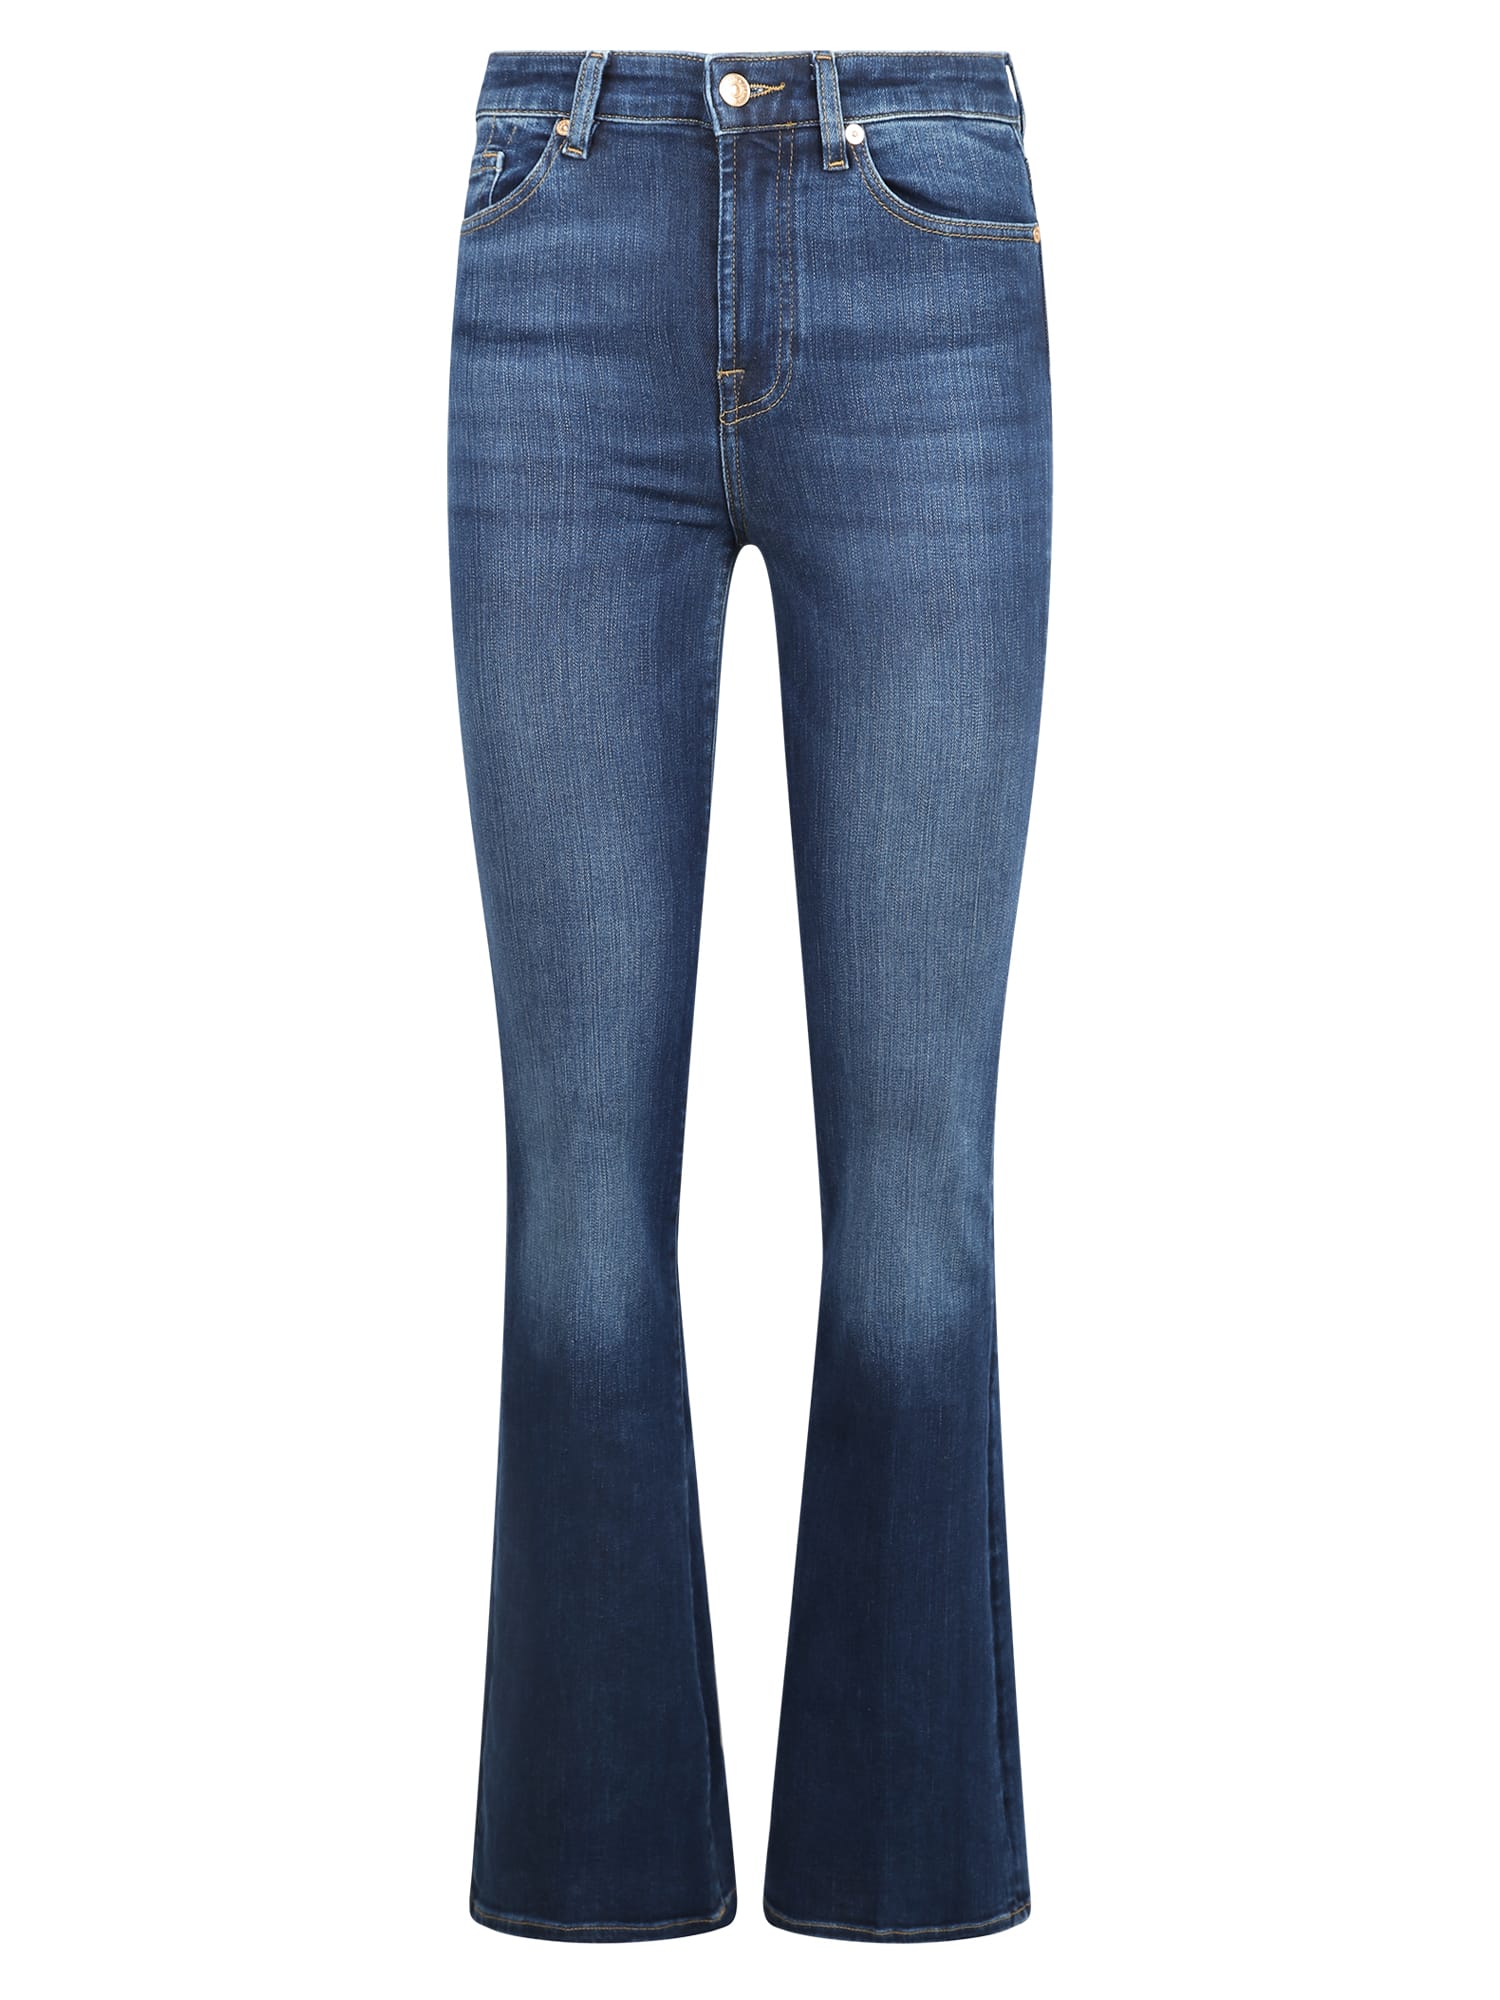 7 For All Mankind Lisha Jeans